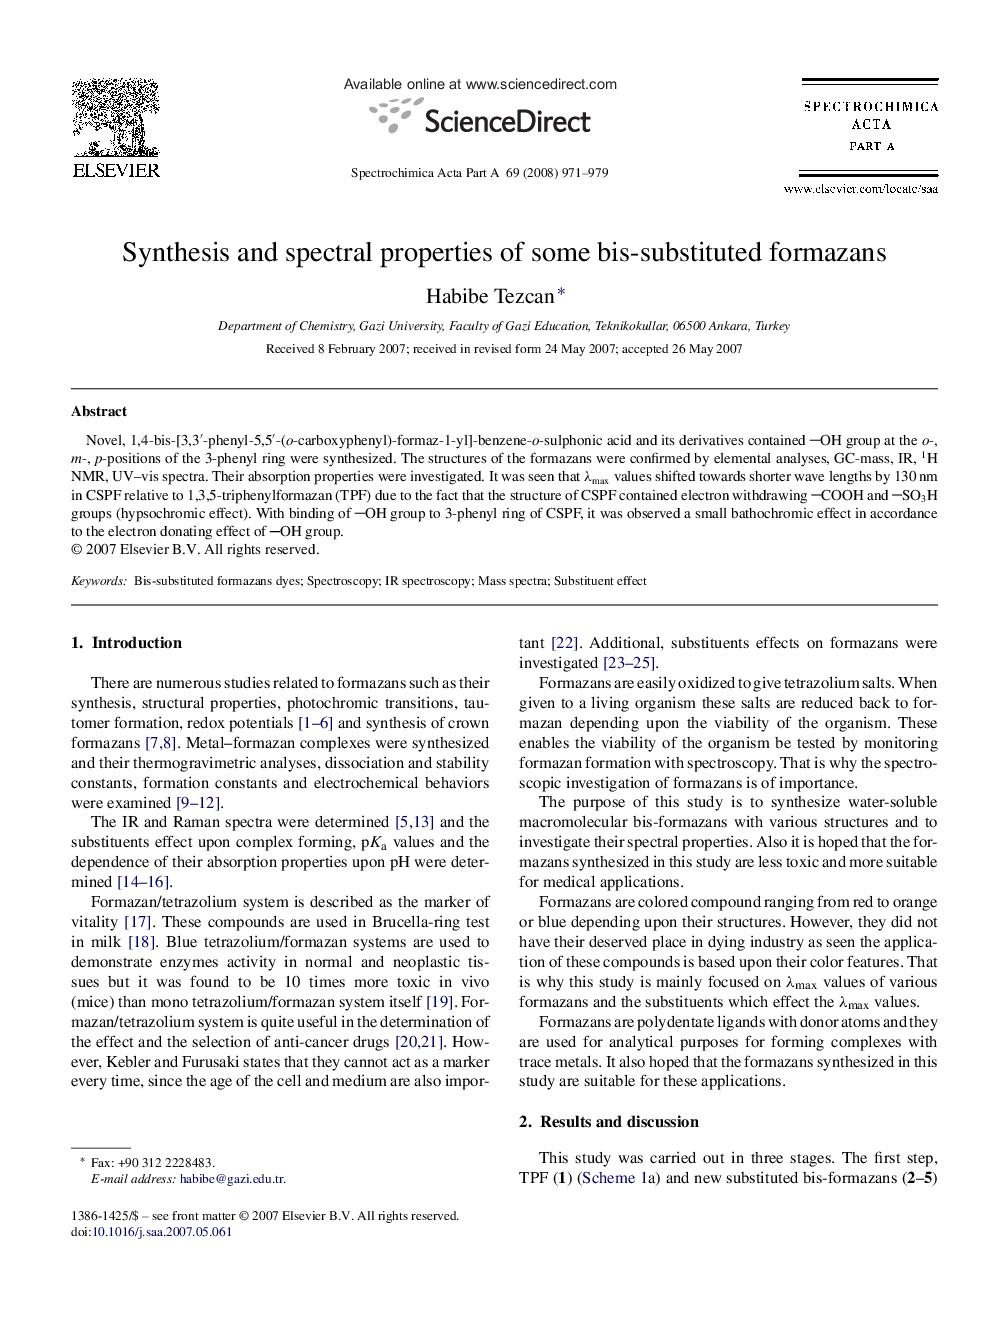 Synthesis and spectral properties of some bis-substituted formazans